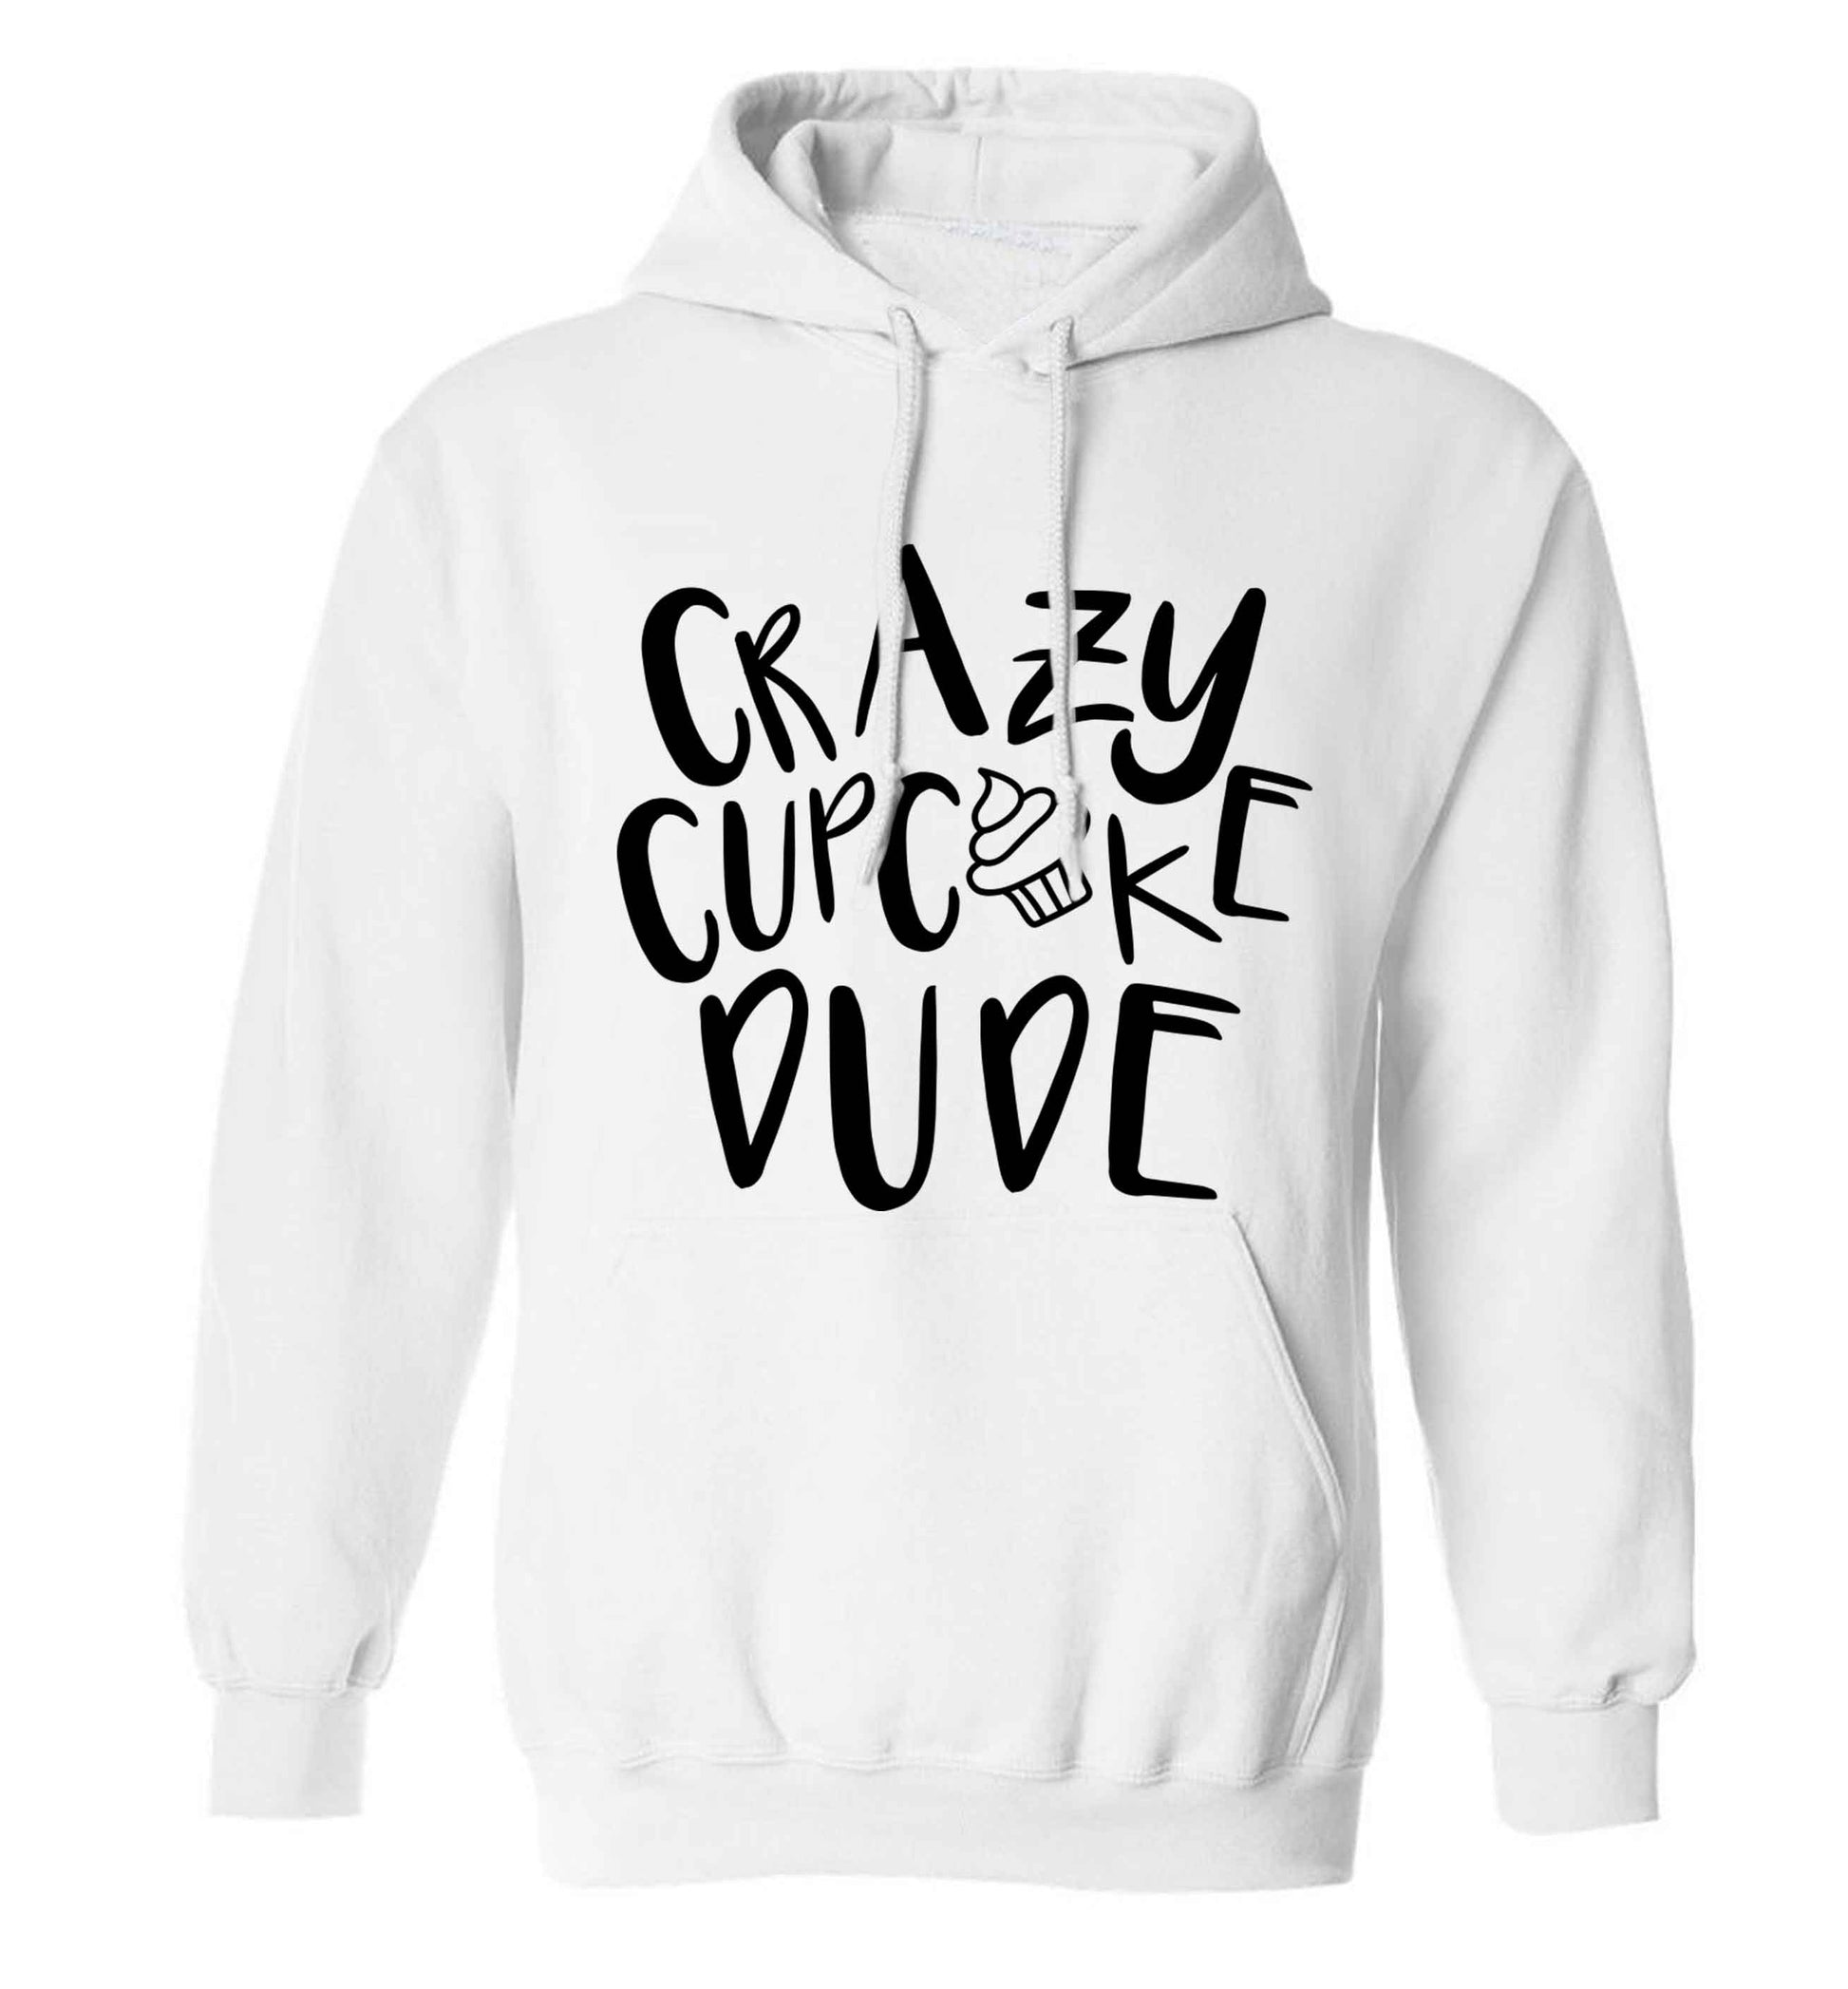 Crazy cupcake dude adults unisex white hoodie 2XL